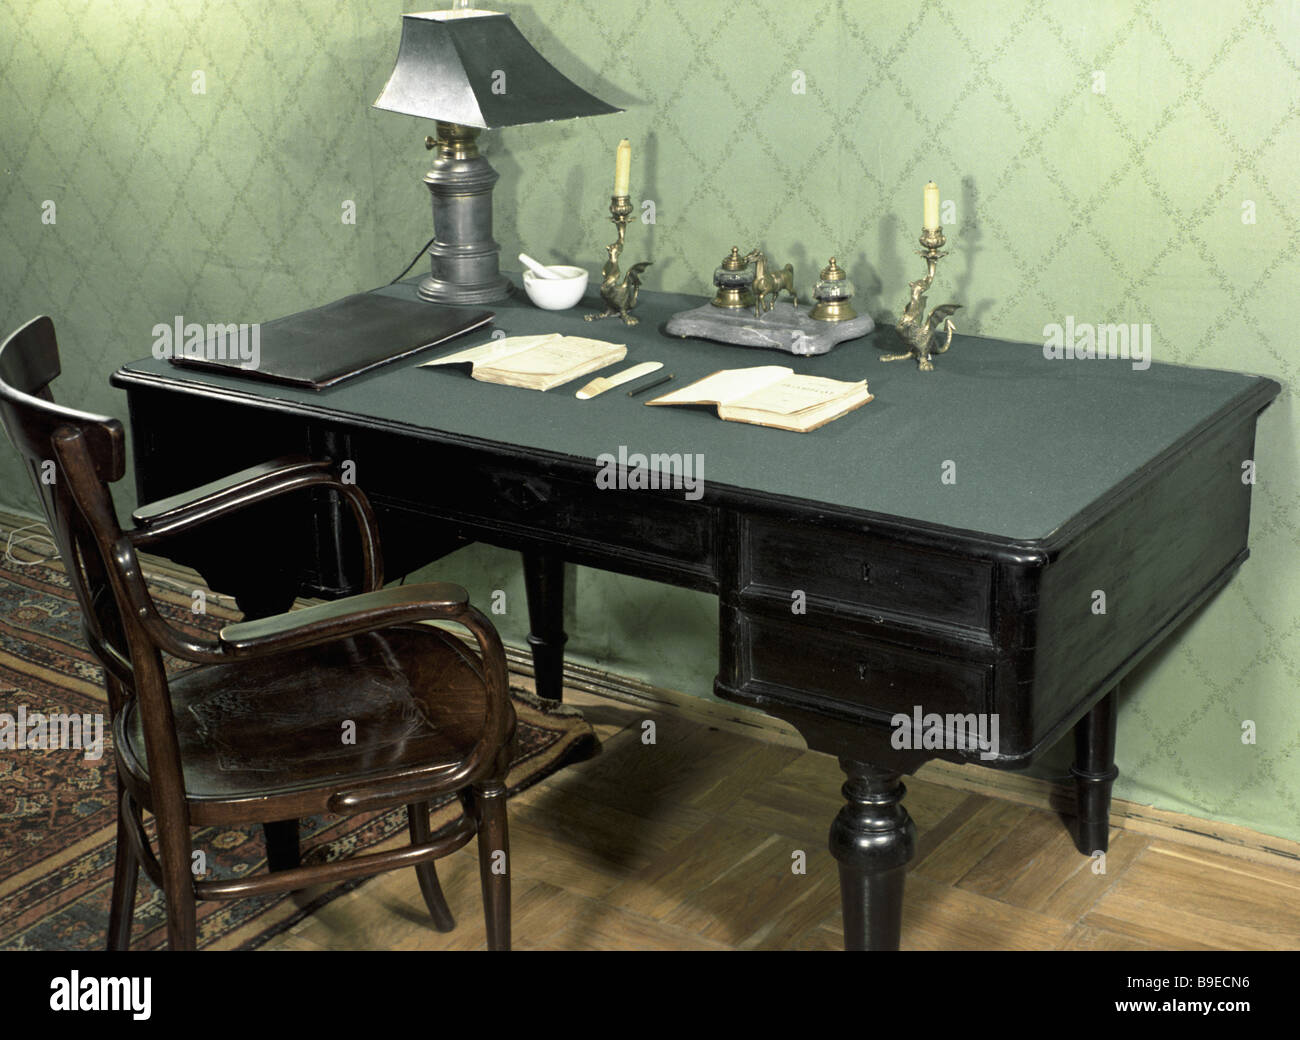 The Working Table Of The Writer Anton Chekhov From The Collection